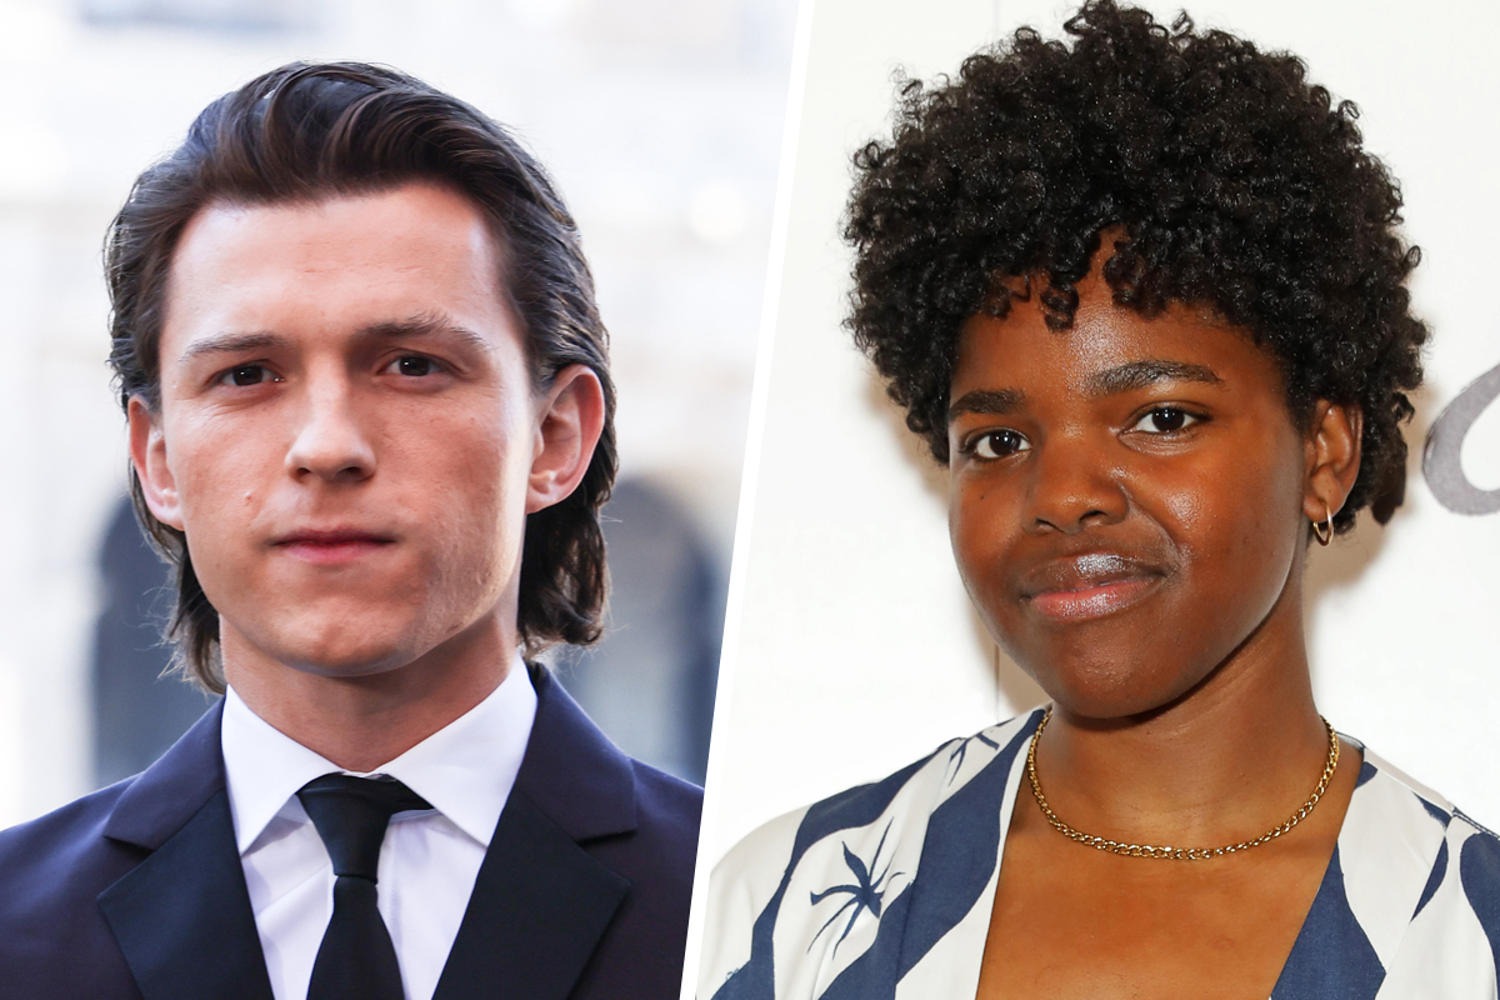 'Romeo & Juliet' play starring Tom Holland and Francesca Amewudah-Rivers faces 'barrage of racial abuse'